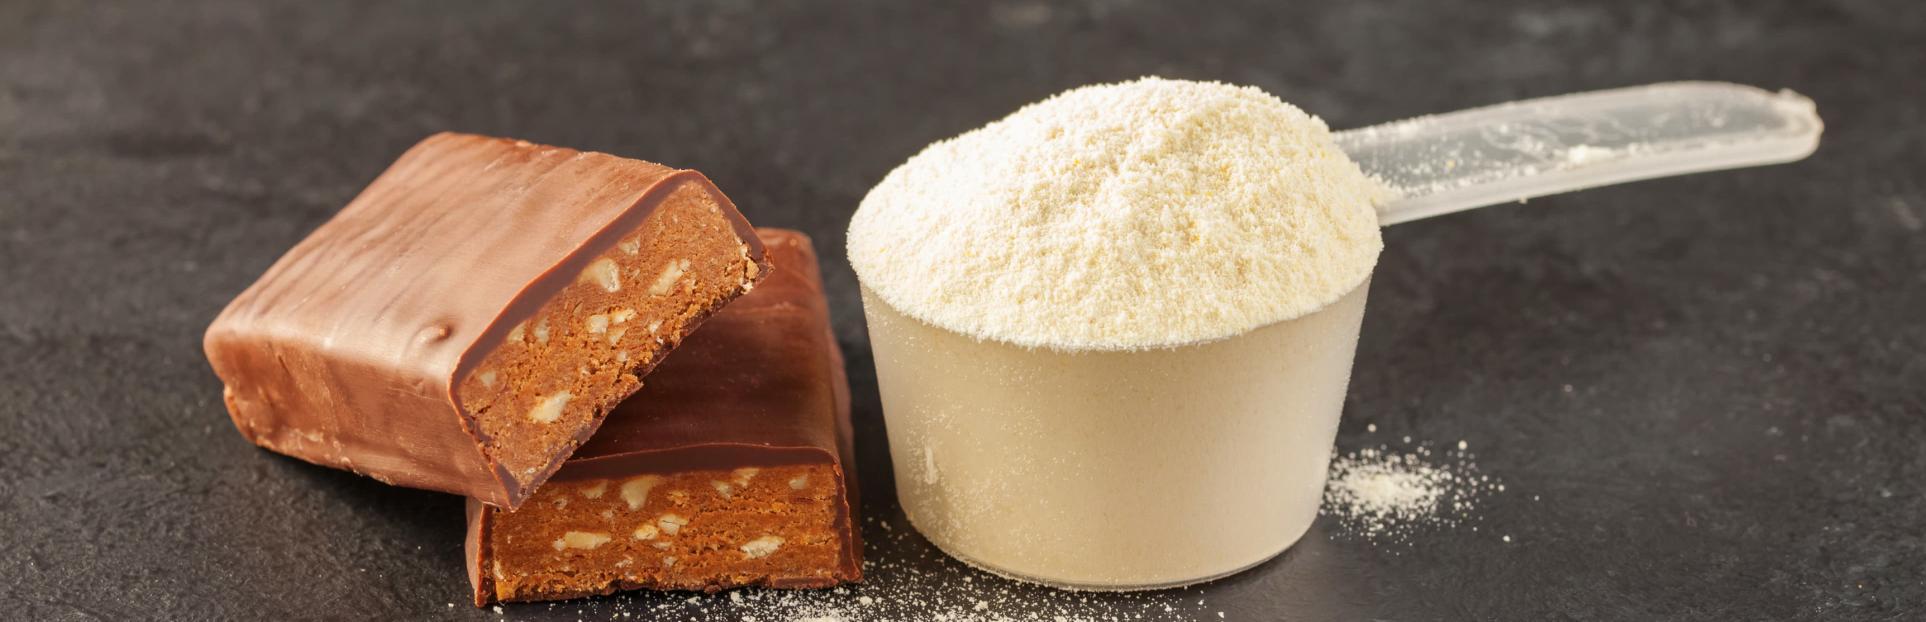 Protein powder and Protein bar